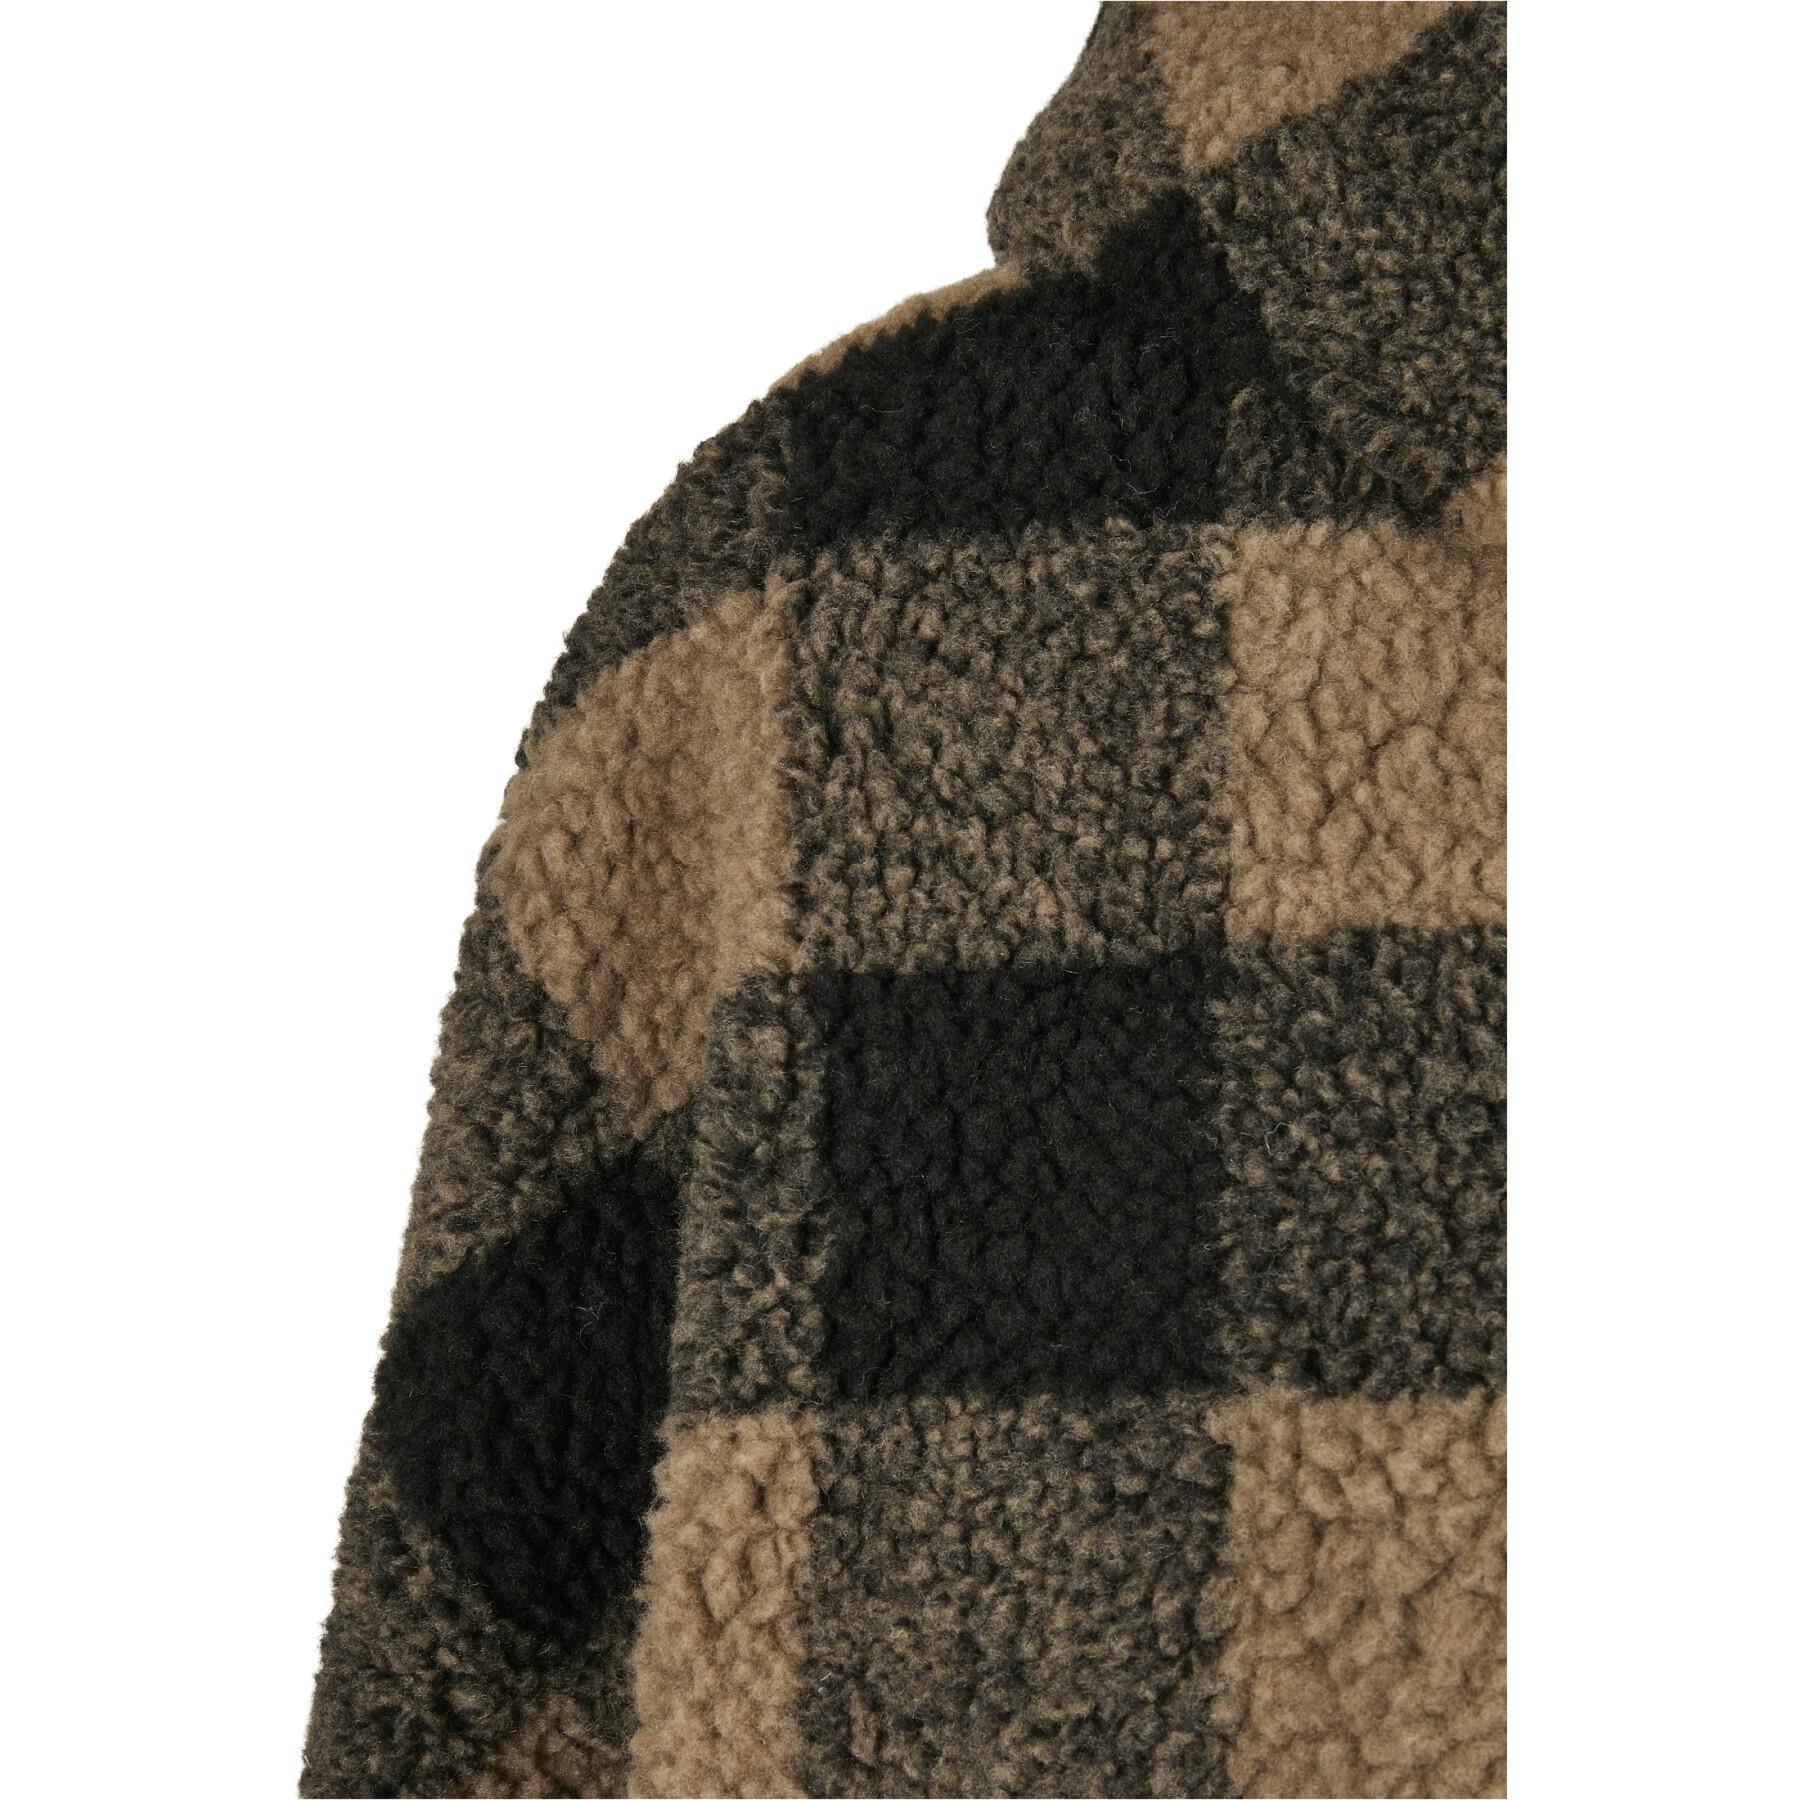 Polaire femme grandes tailles Urban Classics hooded oversized check sherpa